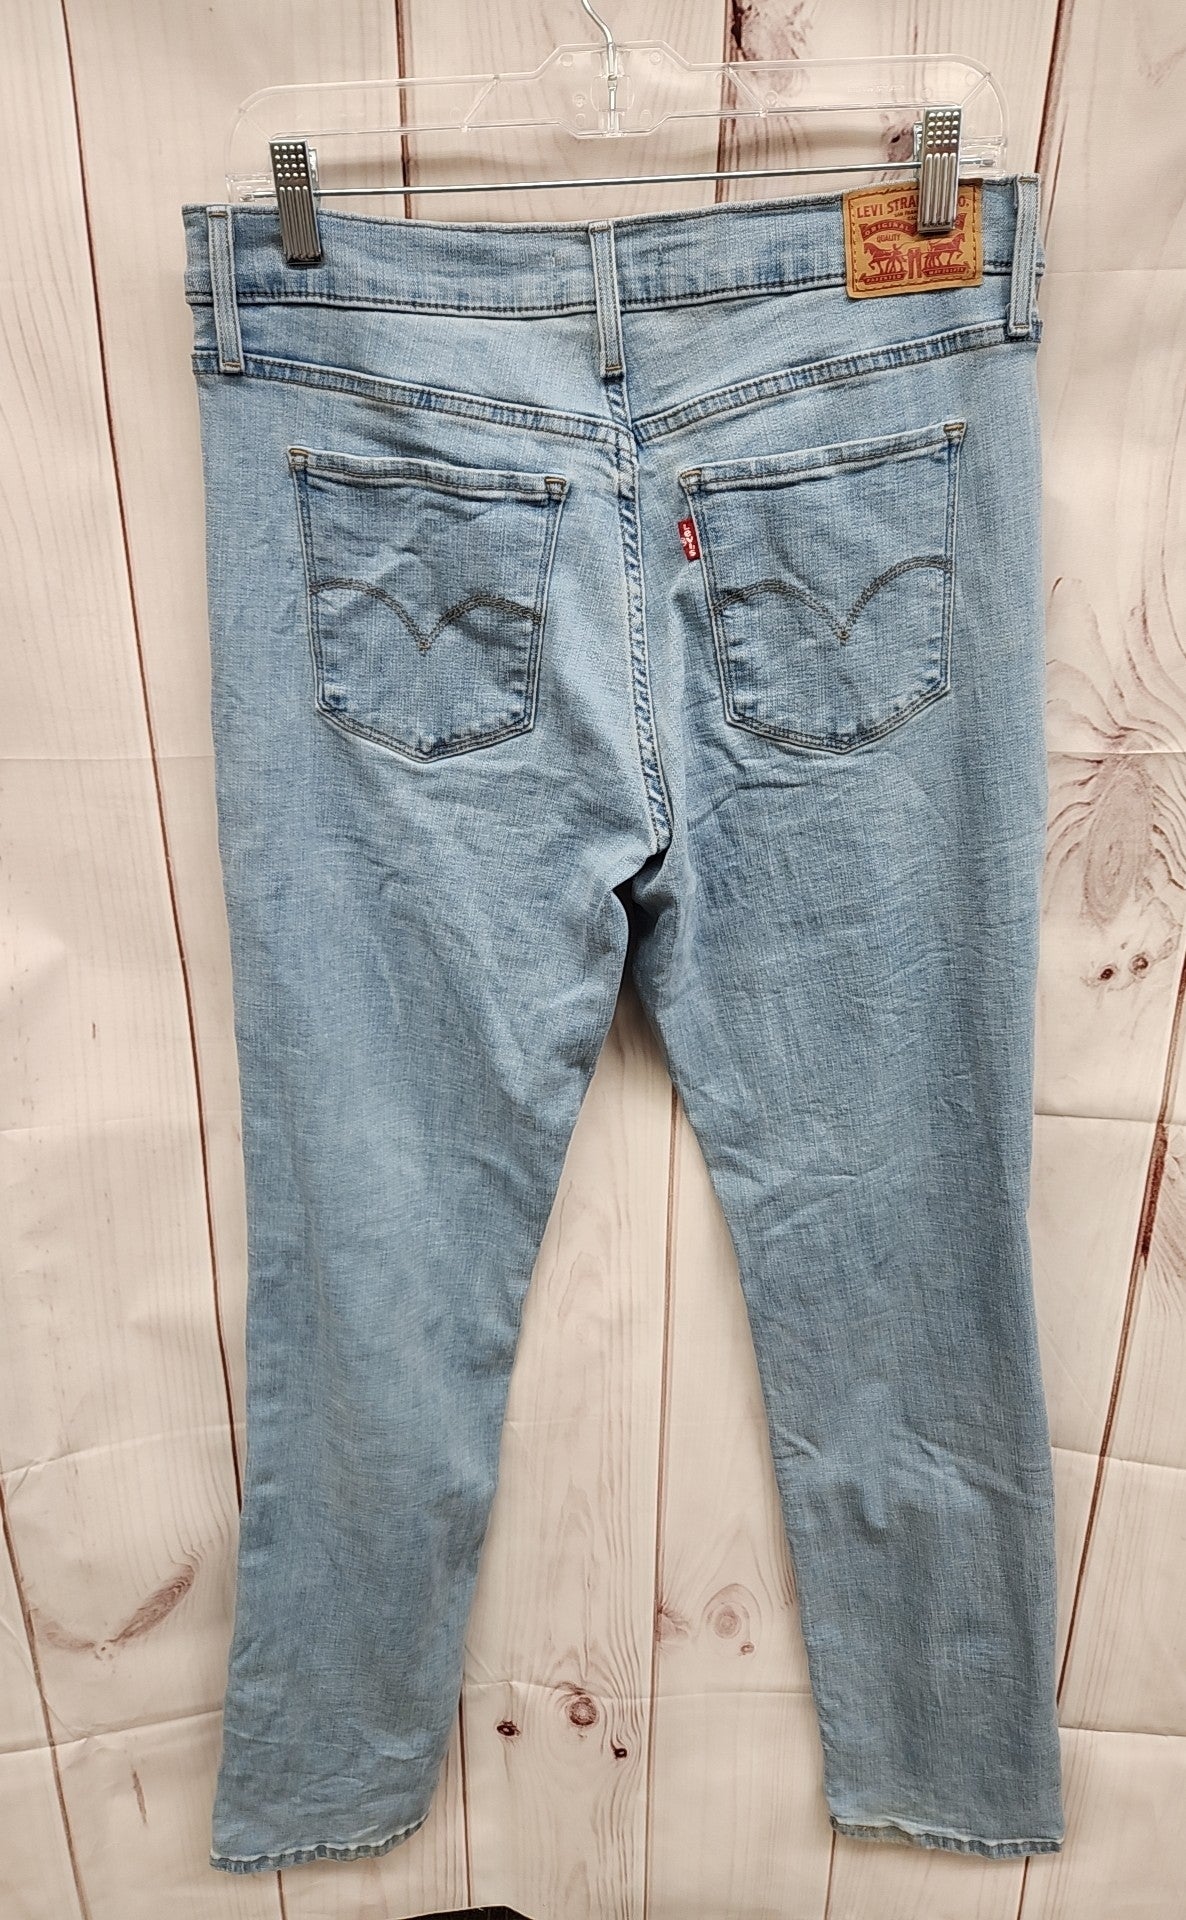 Levis Women's Size 31 (11-12) 314 Shaping Straight Blue Jeans